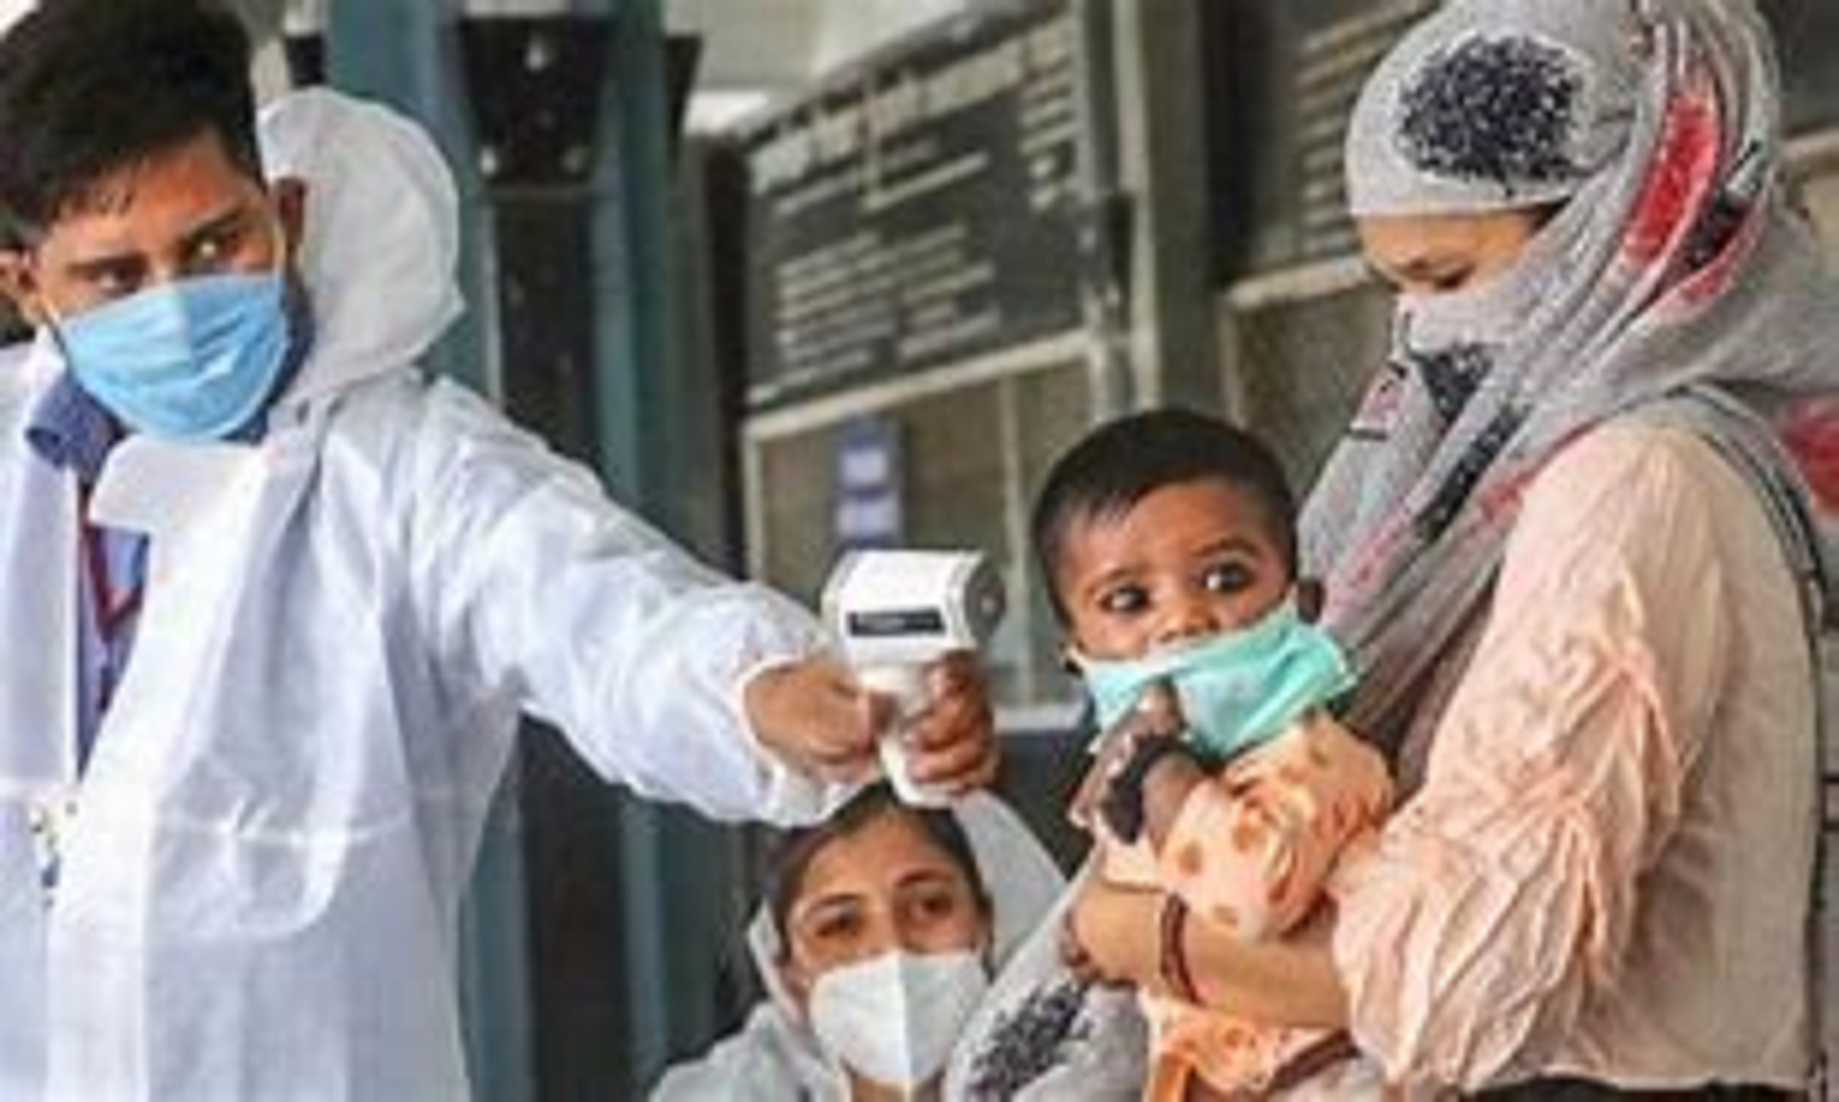 India’s COVID-19 Tally Reaches 9,462,809 With 31,118 New Cases